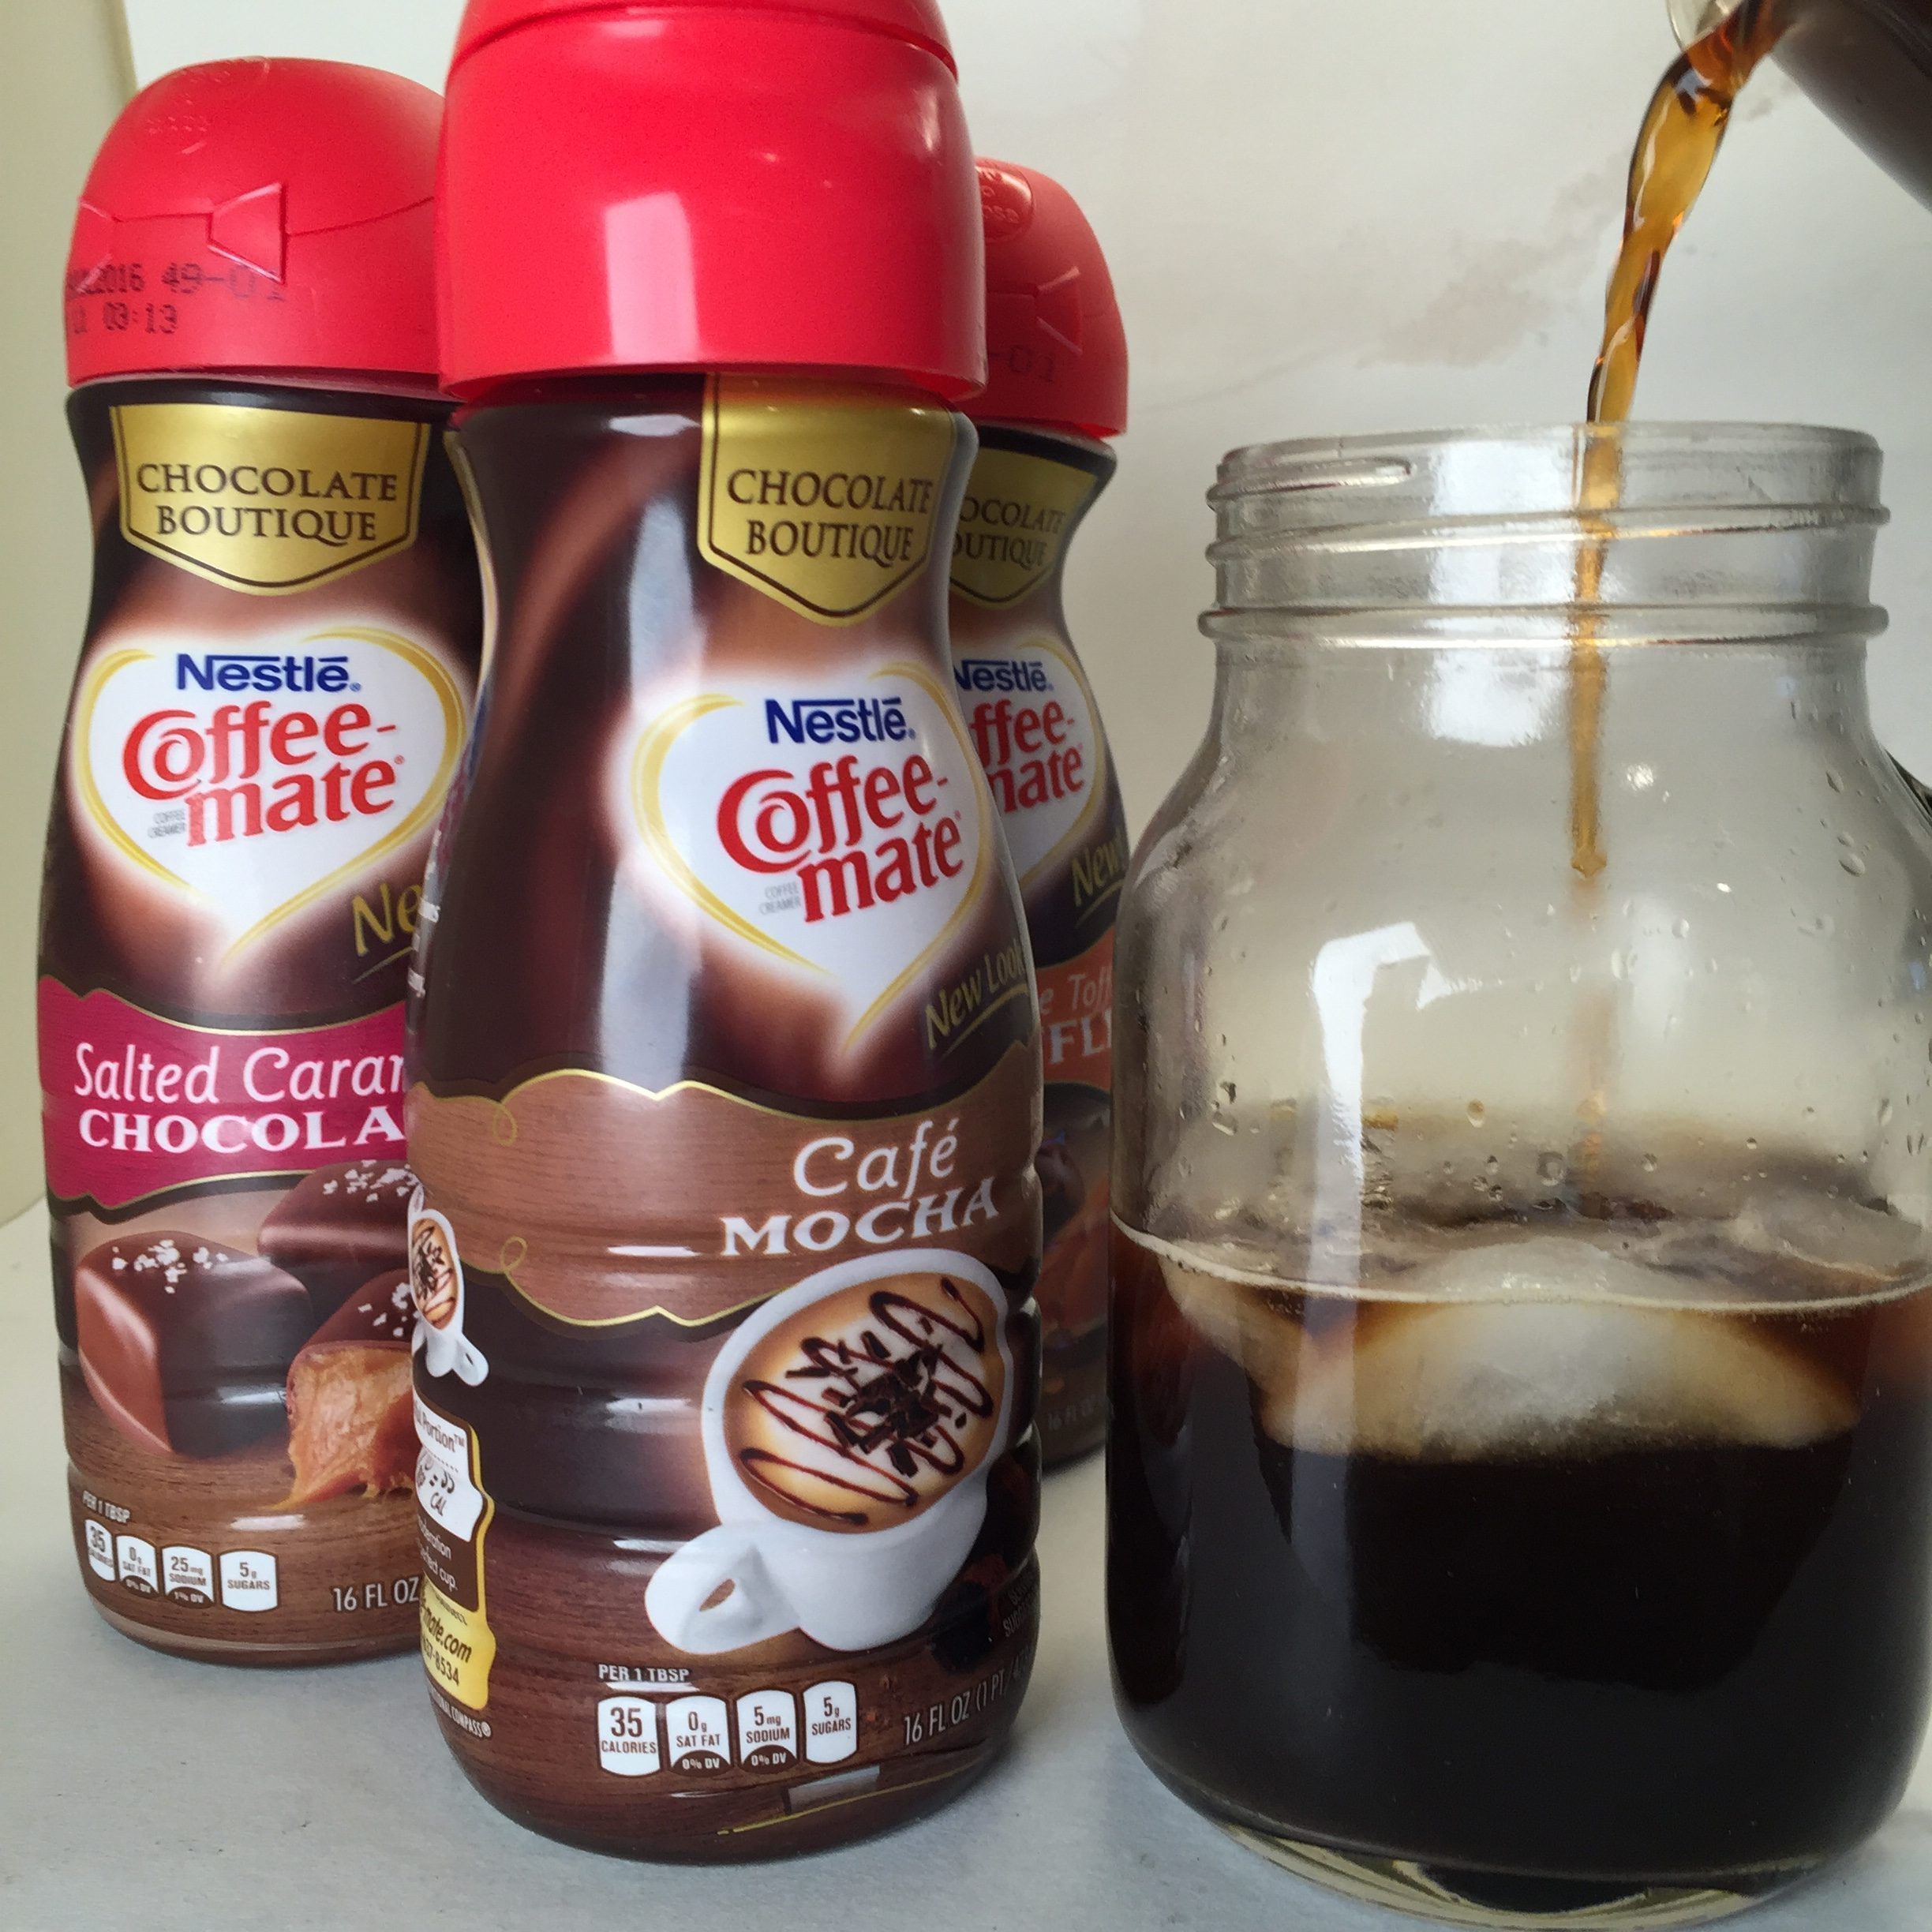 Coffee-Mate NEW Chocolate Boutique Flavors